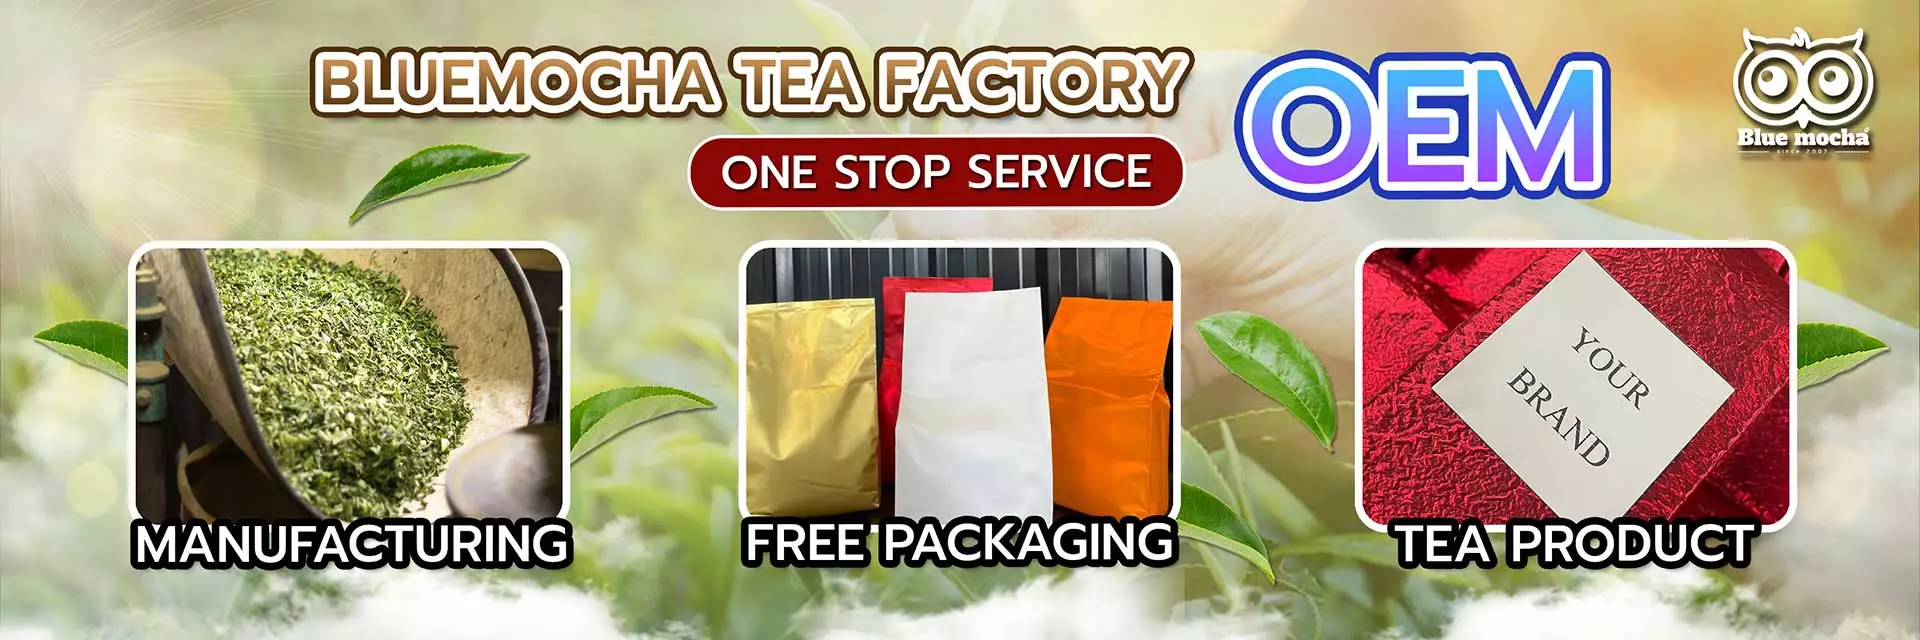 oem tea brand in chiang mai thailand working on oem